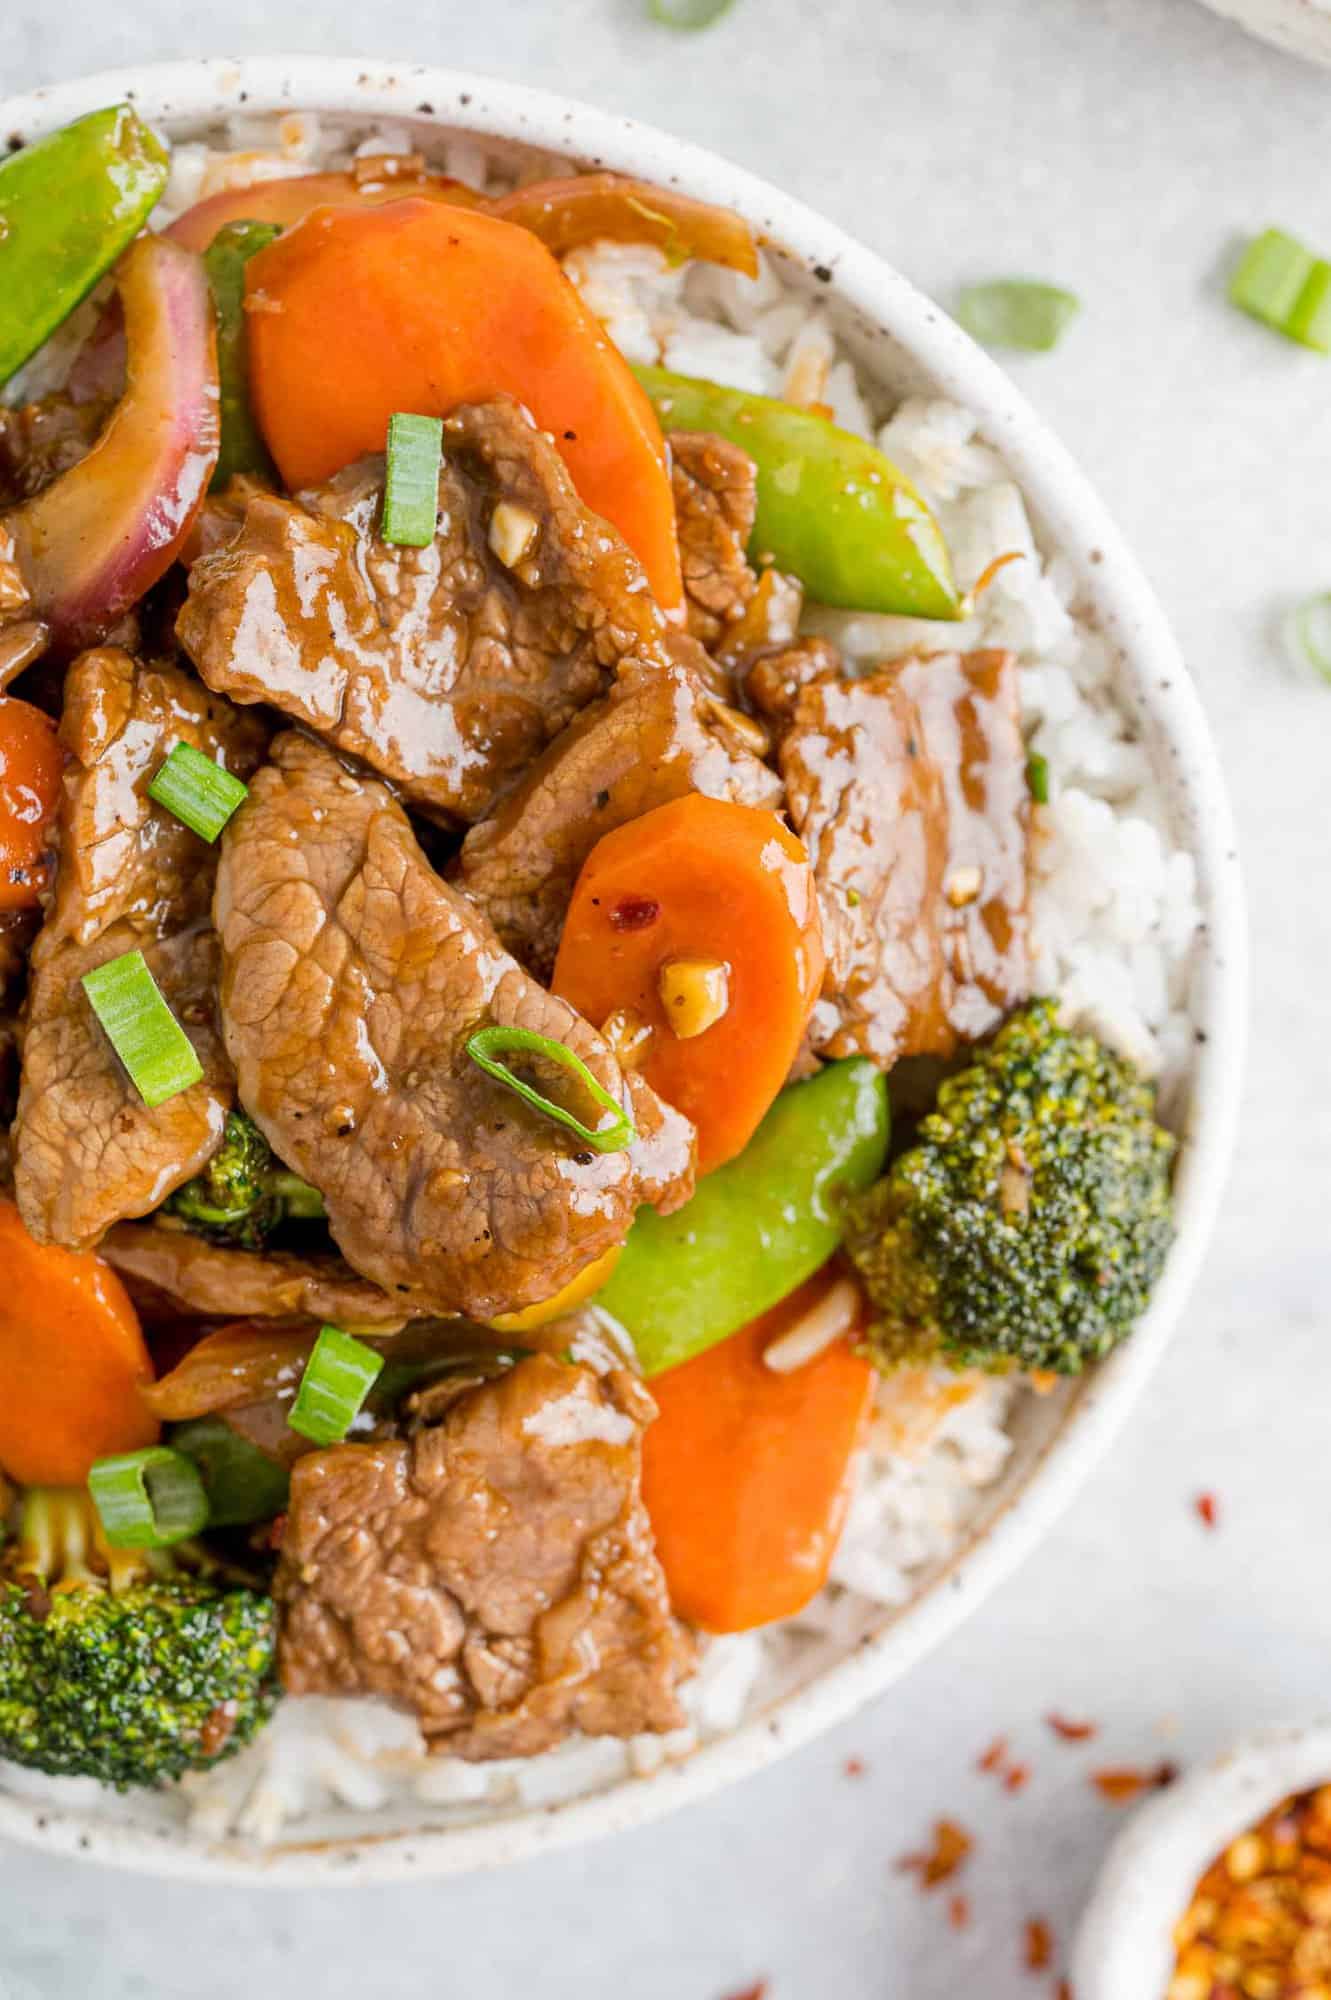 Beef stir fry with vegetables served on top of rice.